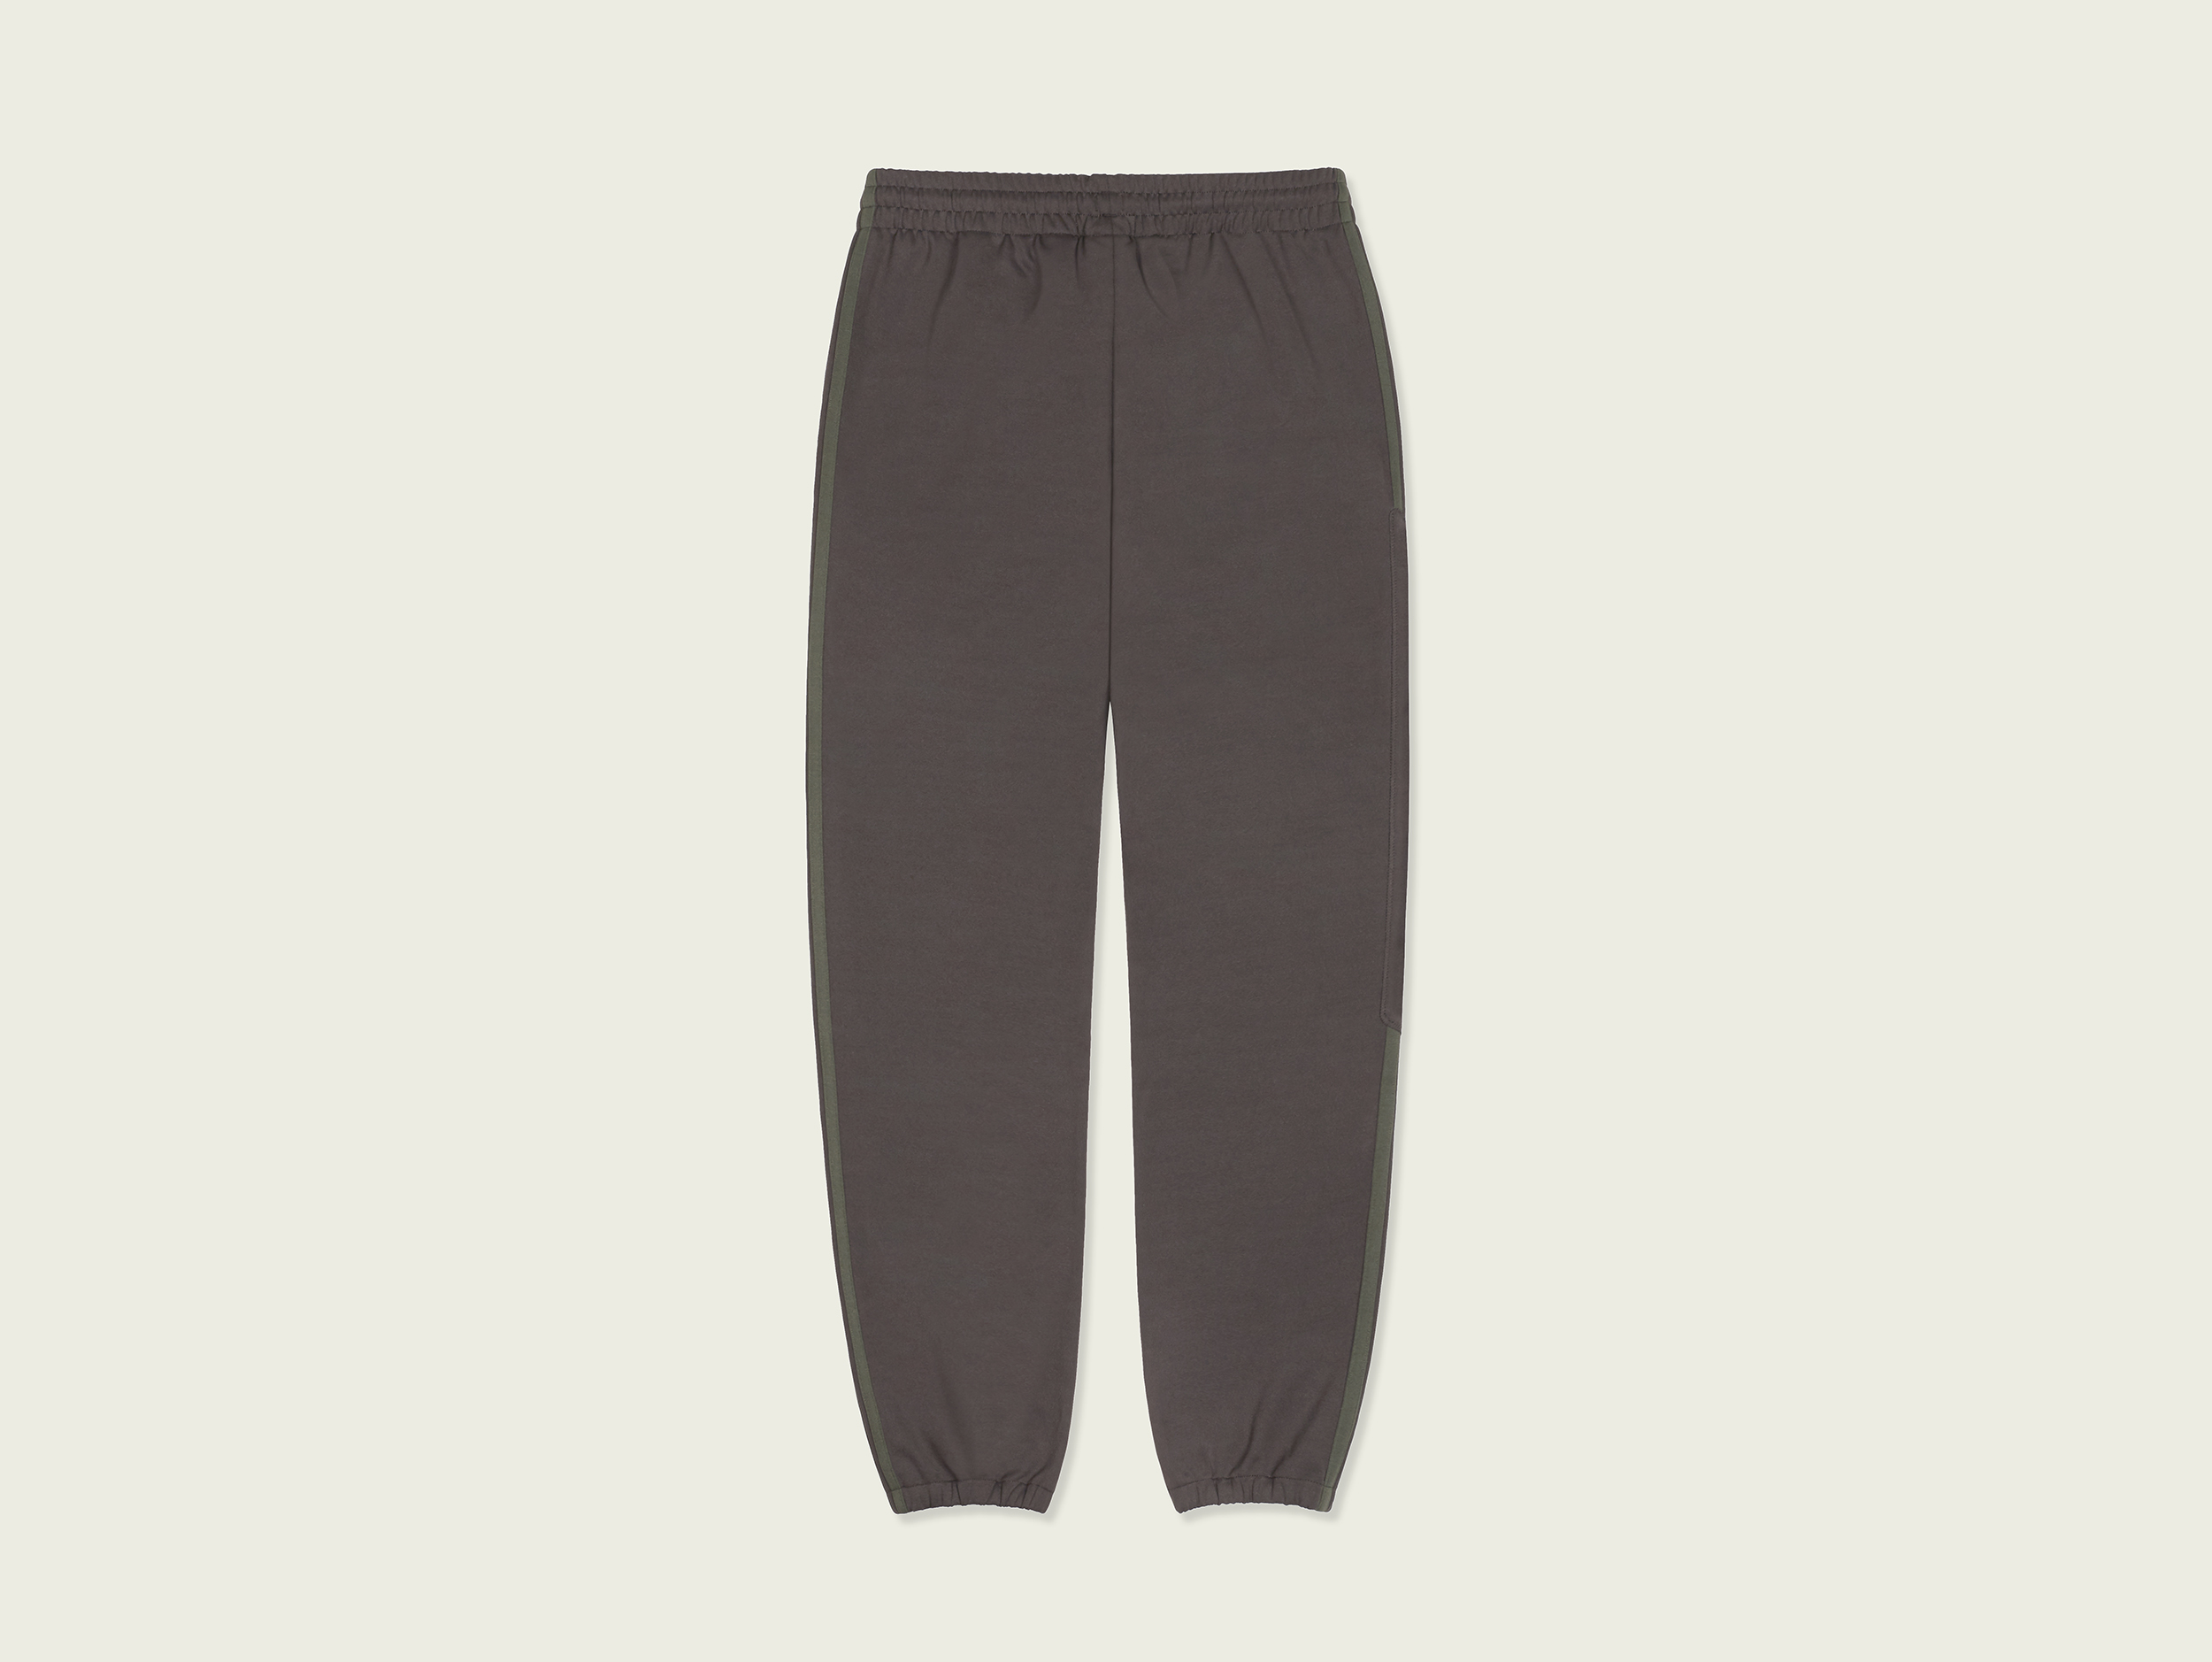 More Colours Of The Calabasas Track Pants Arrive - MASSES